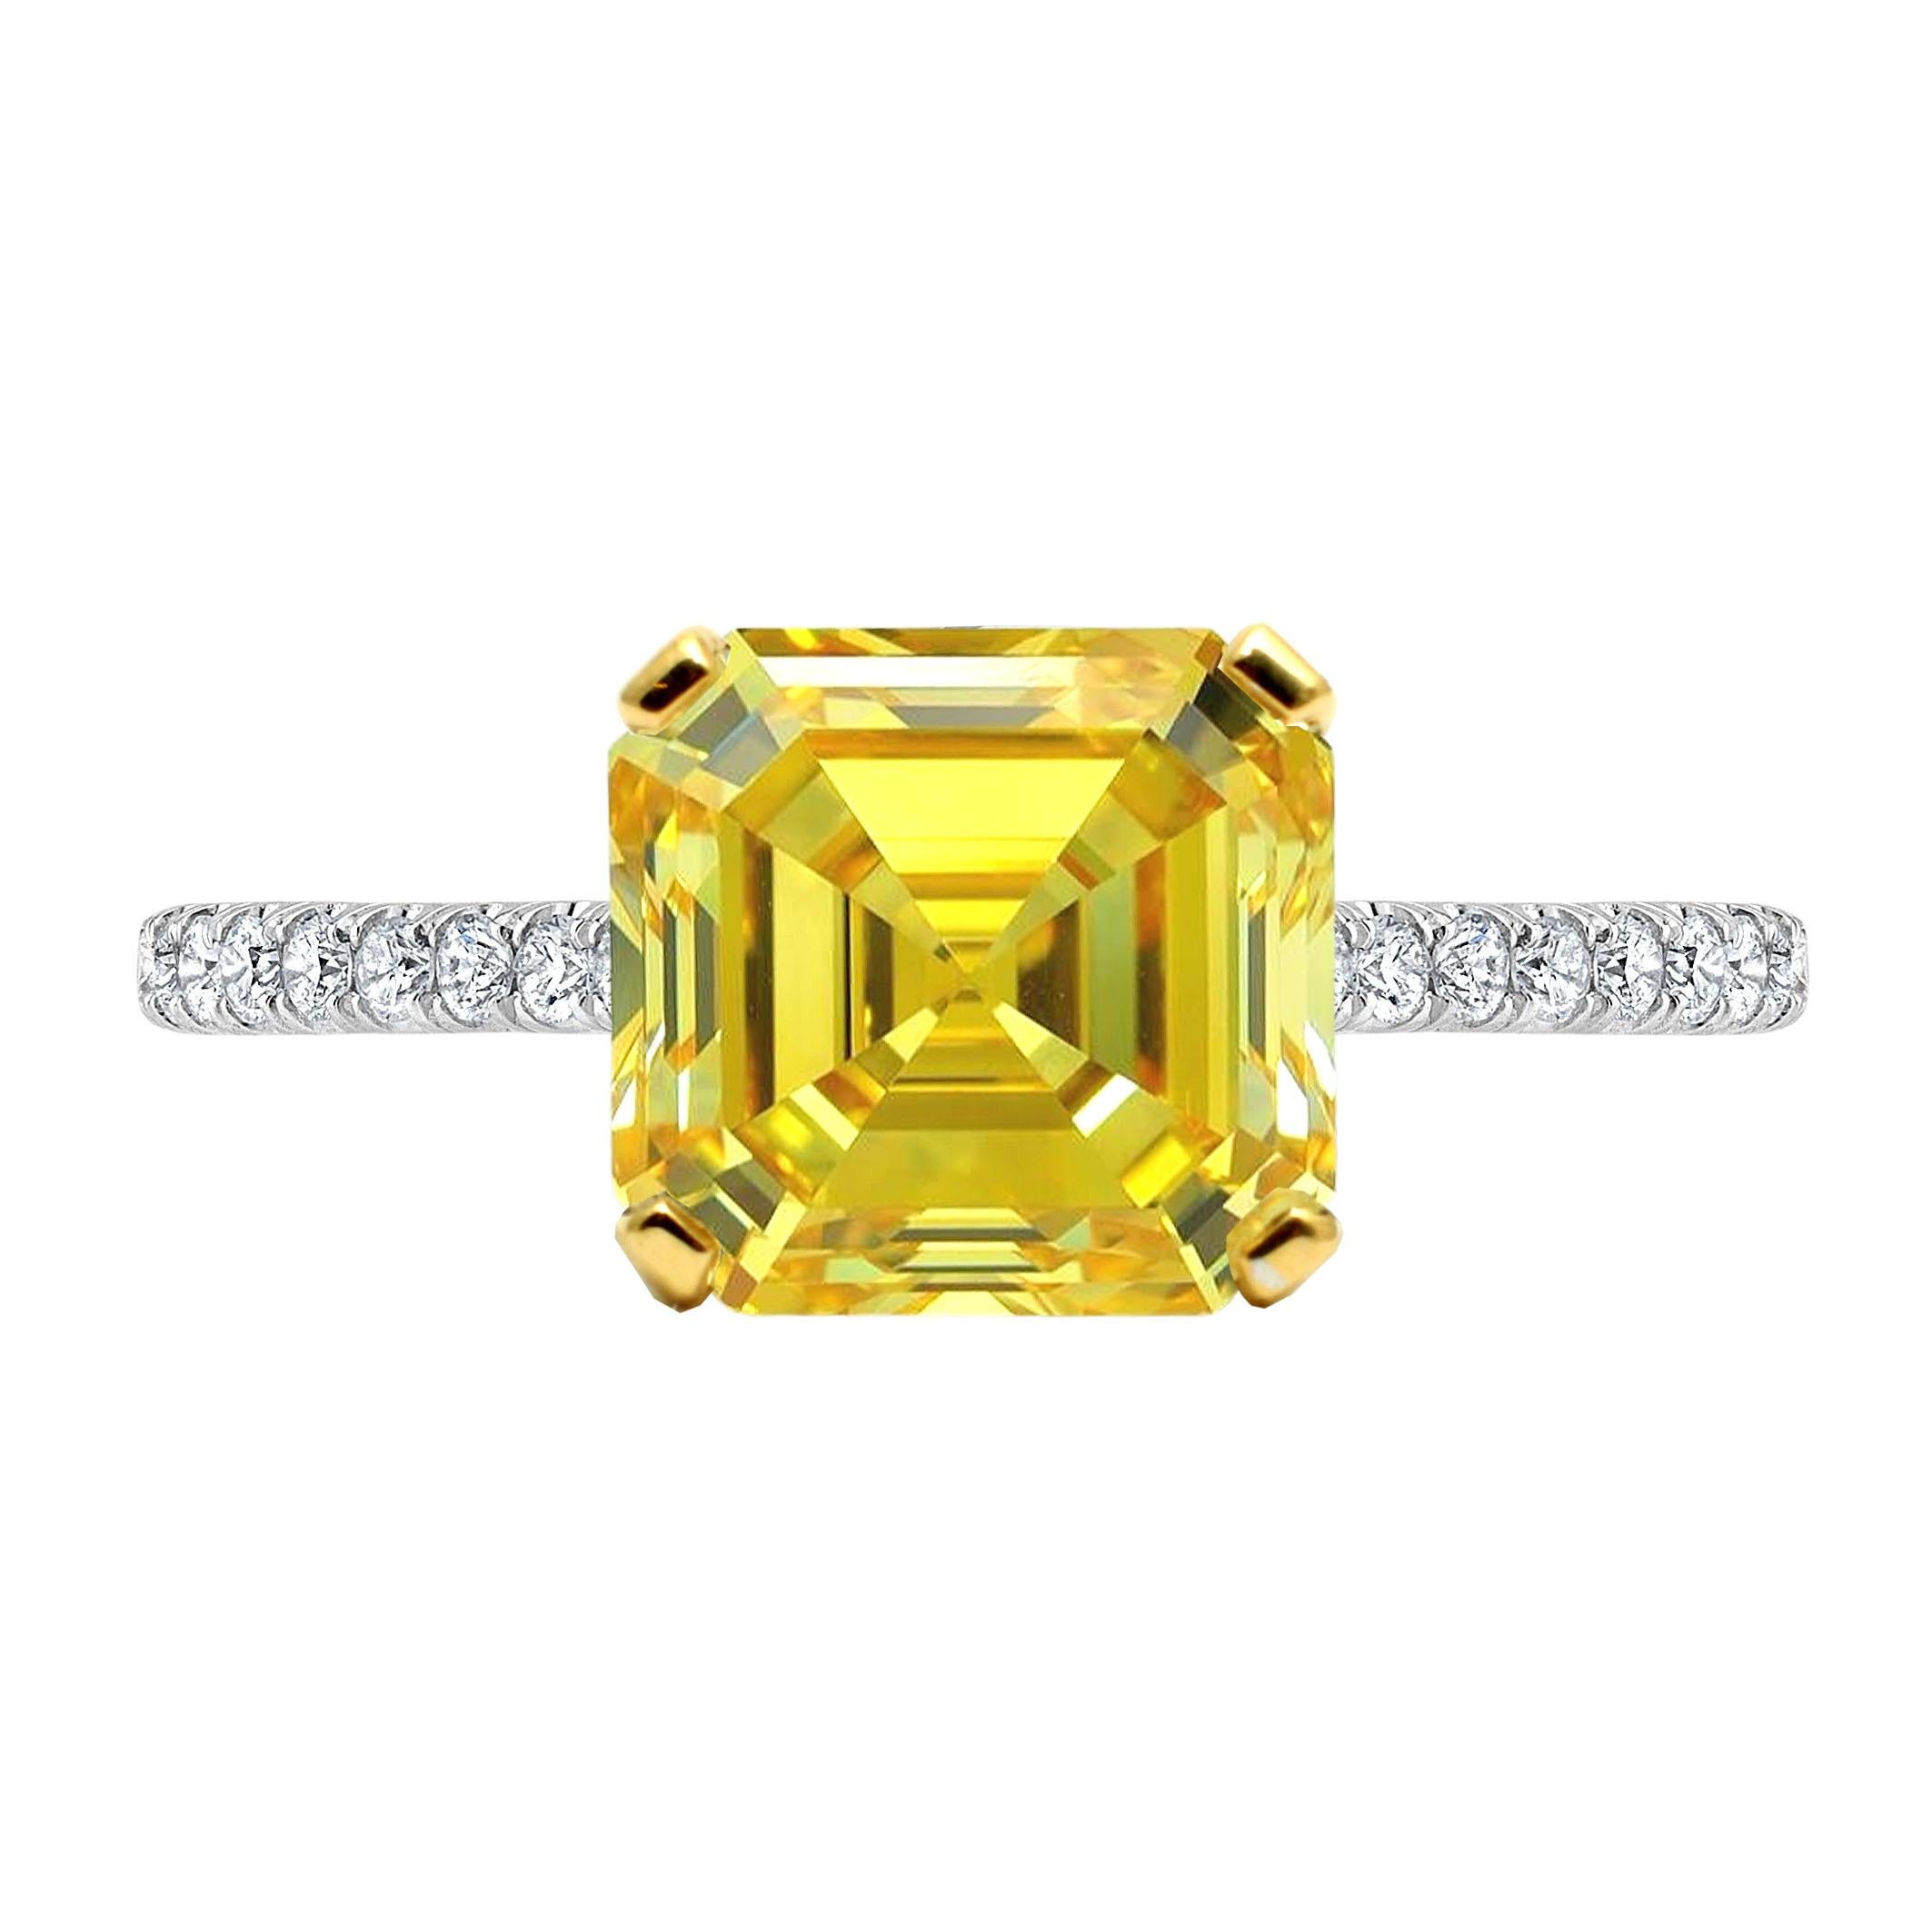 Embrace unparalleled elegance with this GIA Certified 3.18 Ct Asscher Fancy Vivid Yellow Diamond Ring adorned with pavé diamonds. At its center shines a mesmerizing Asscher-cut diamond of extraordinary quality, certified by the esteemed Gemological